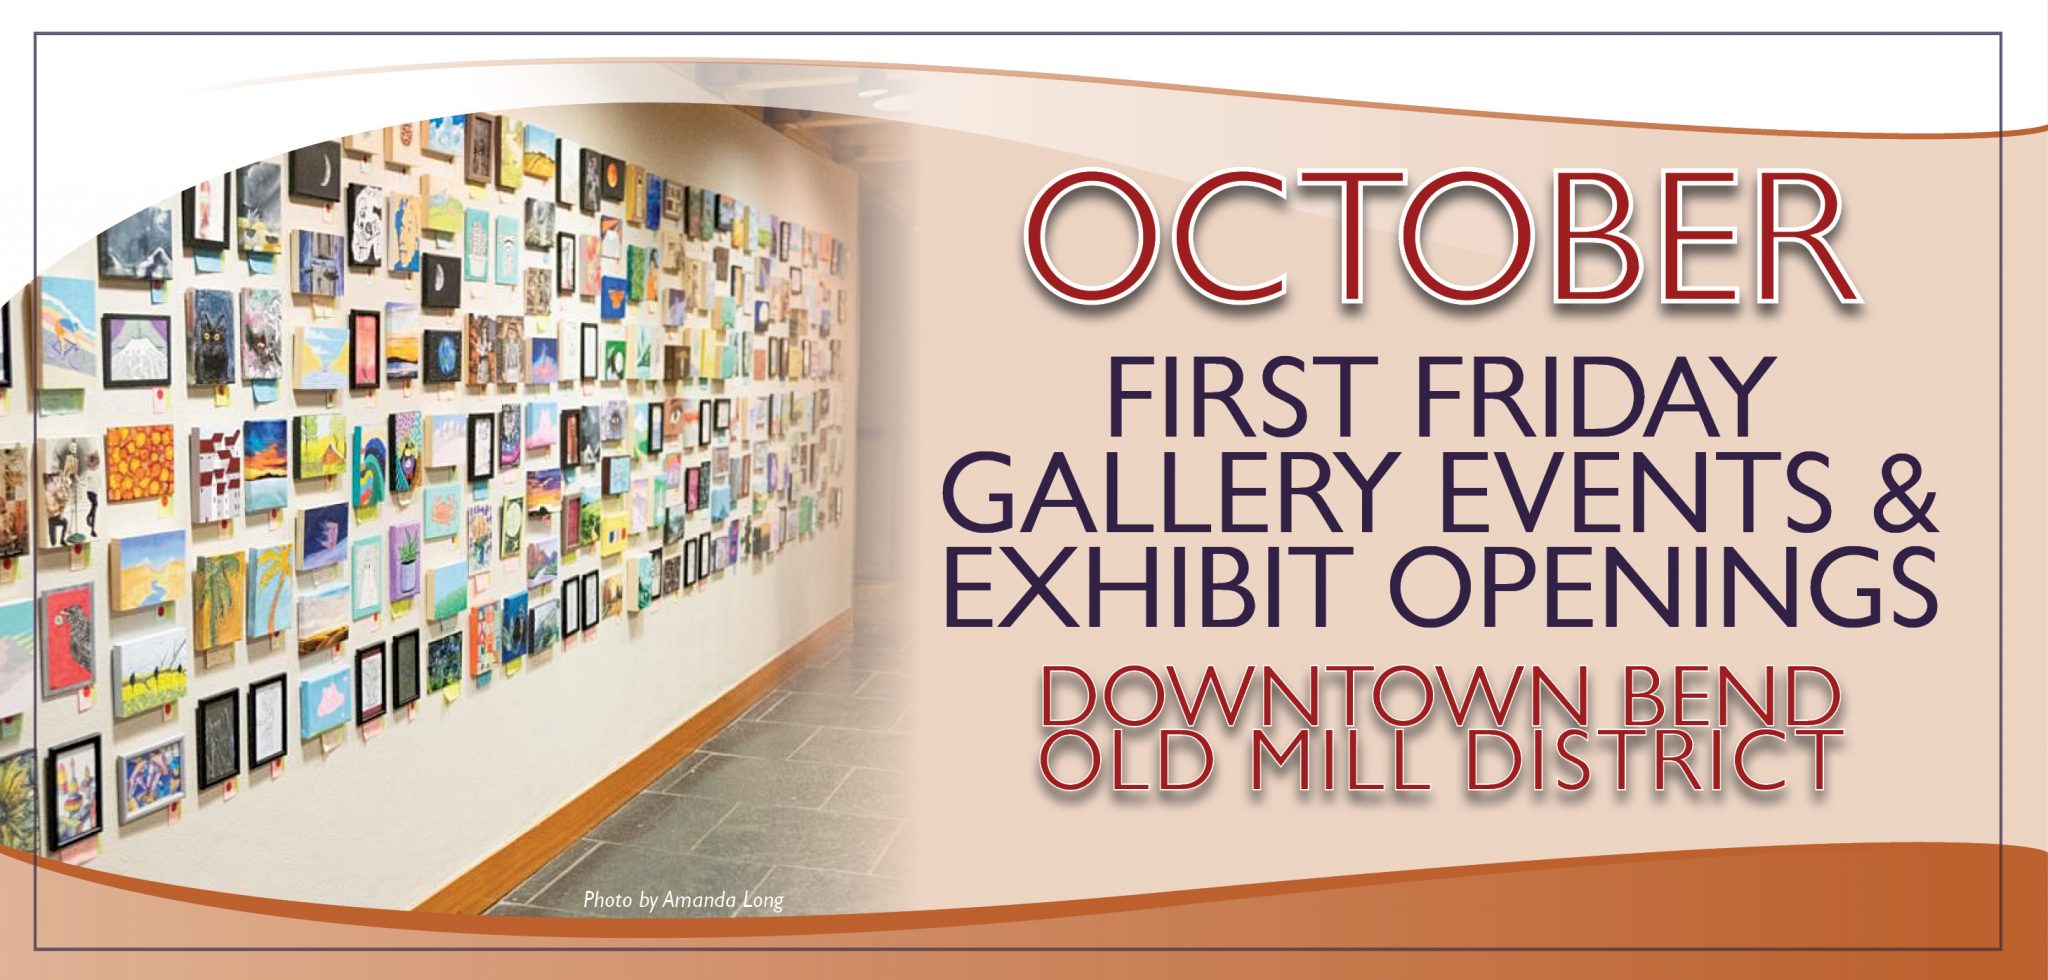 October First Friday Gallery Events & Exhibit Openings in Bend